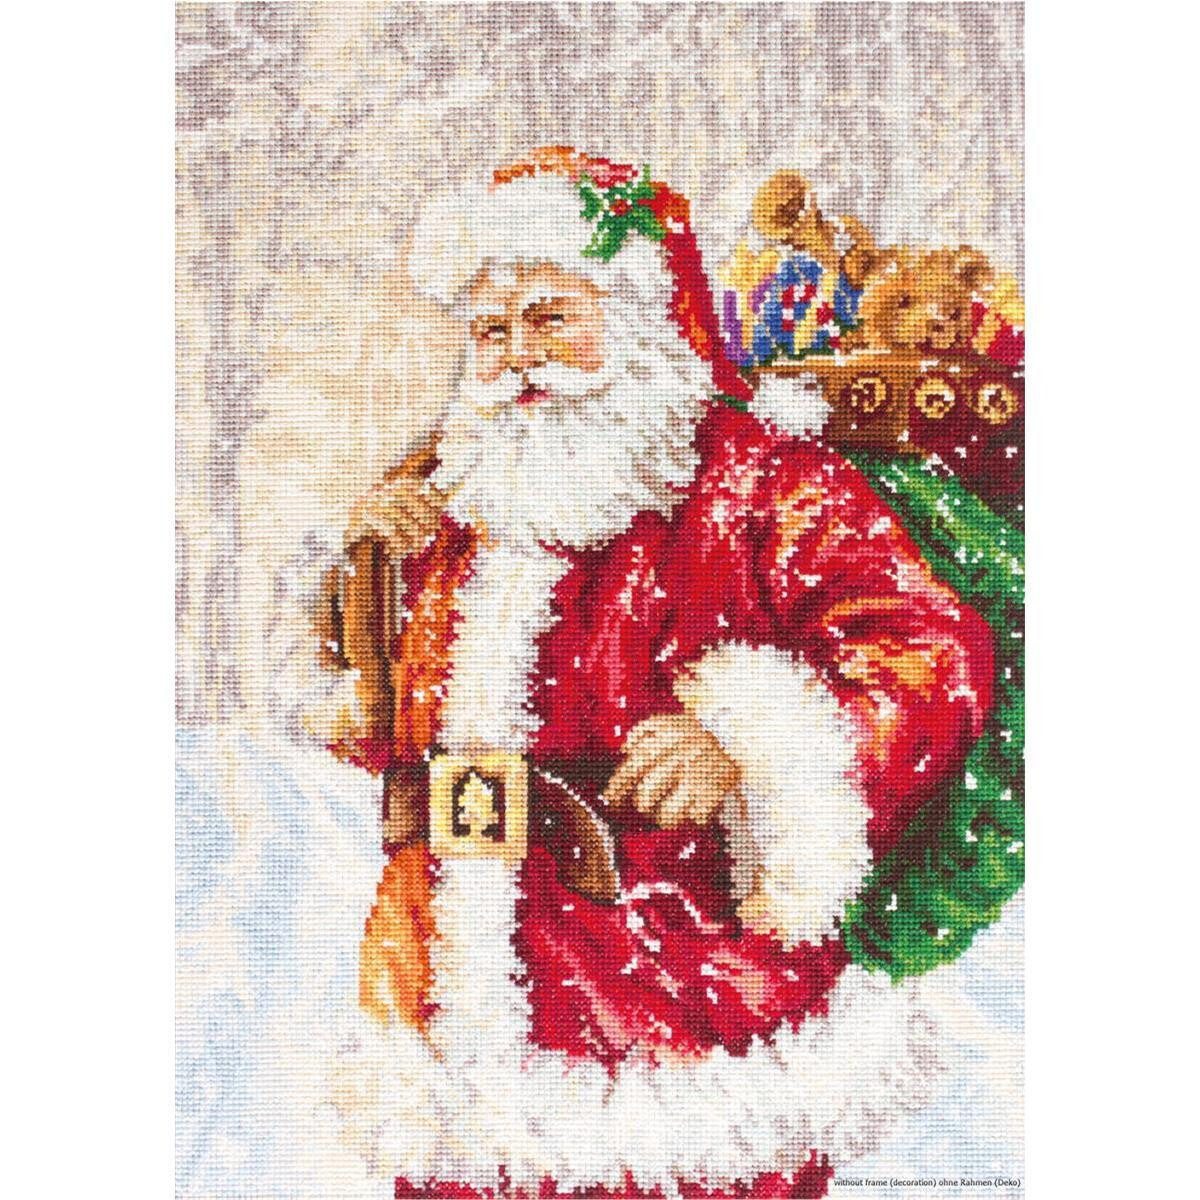 Luca-S counted Cross Stitch kit "Santa Claus",...